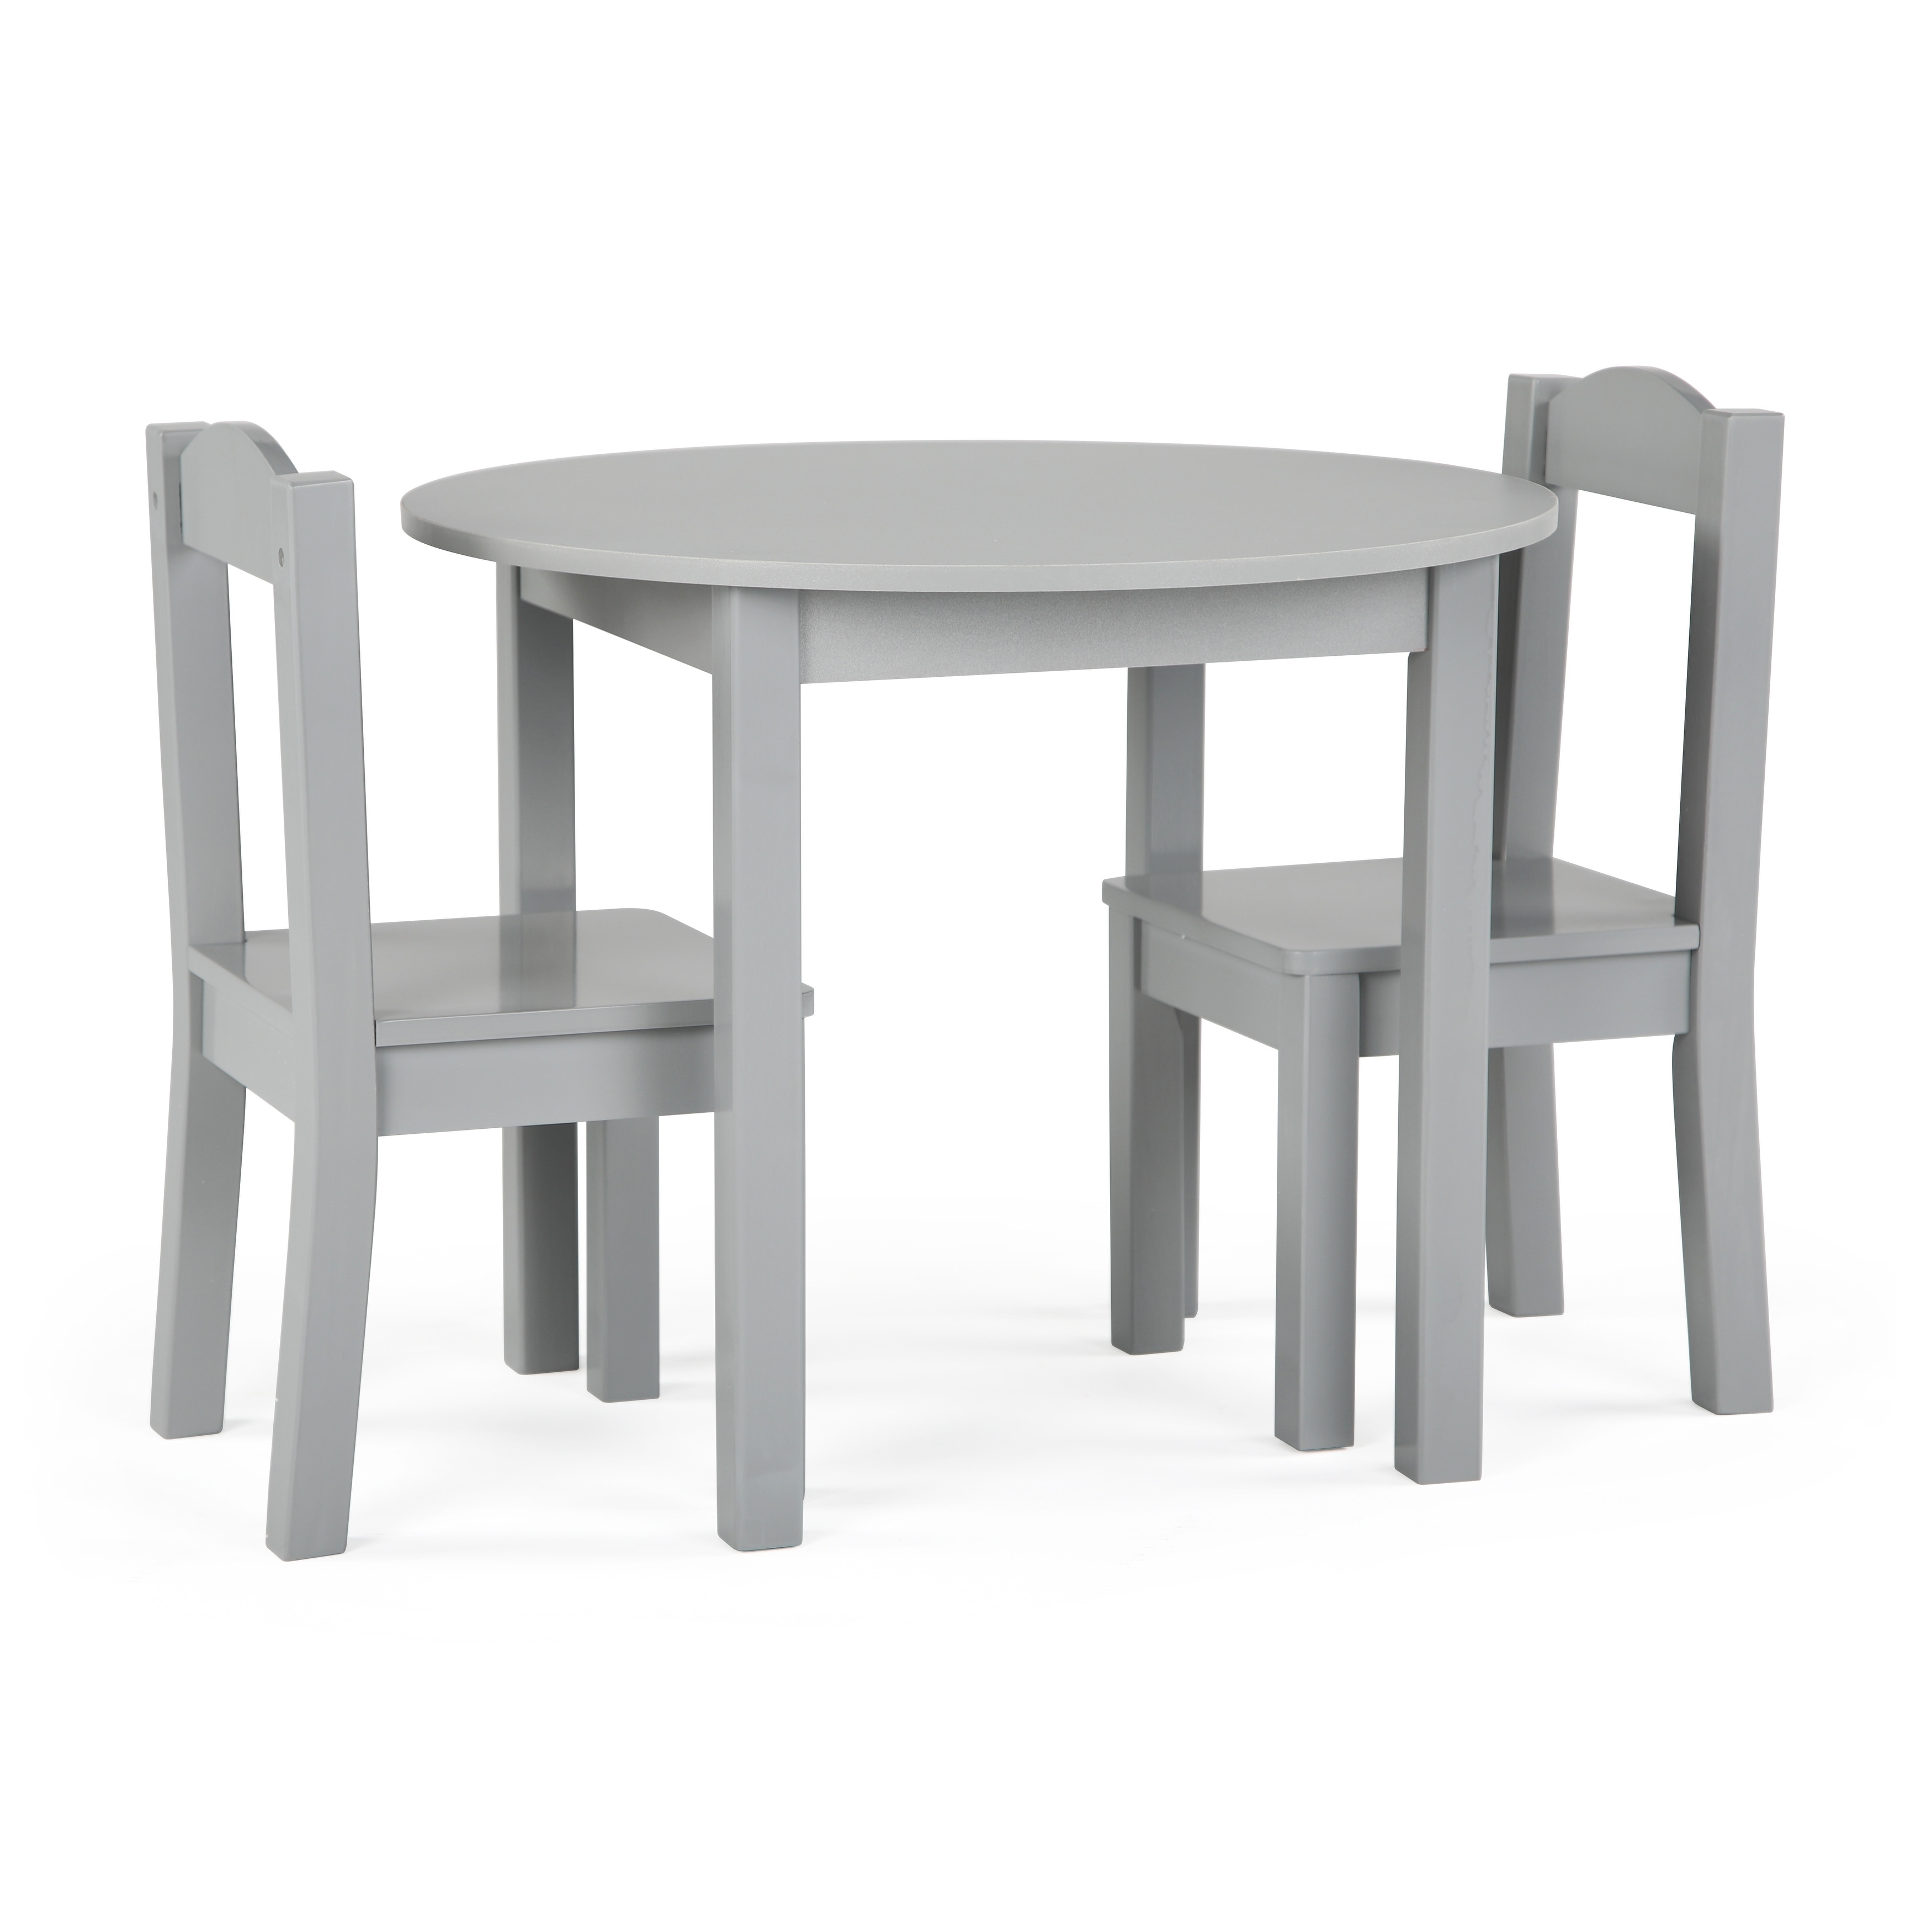 round kids table and chairs